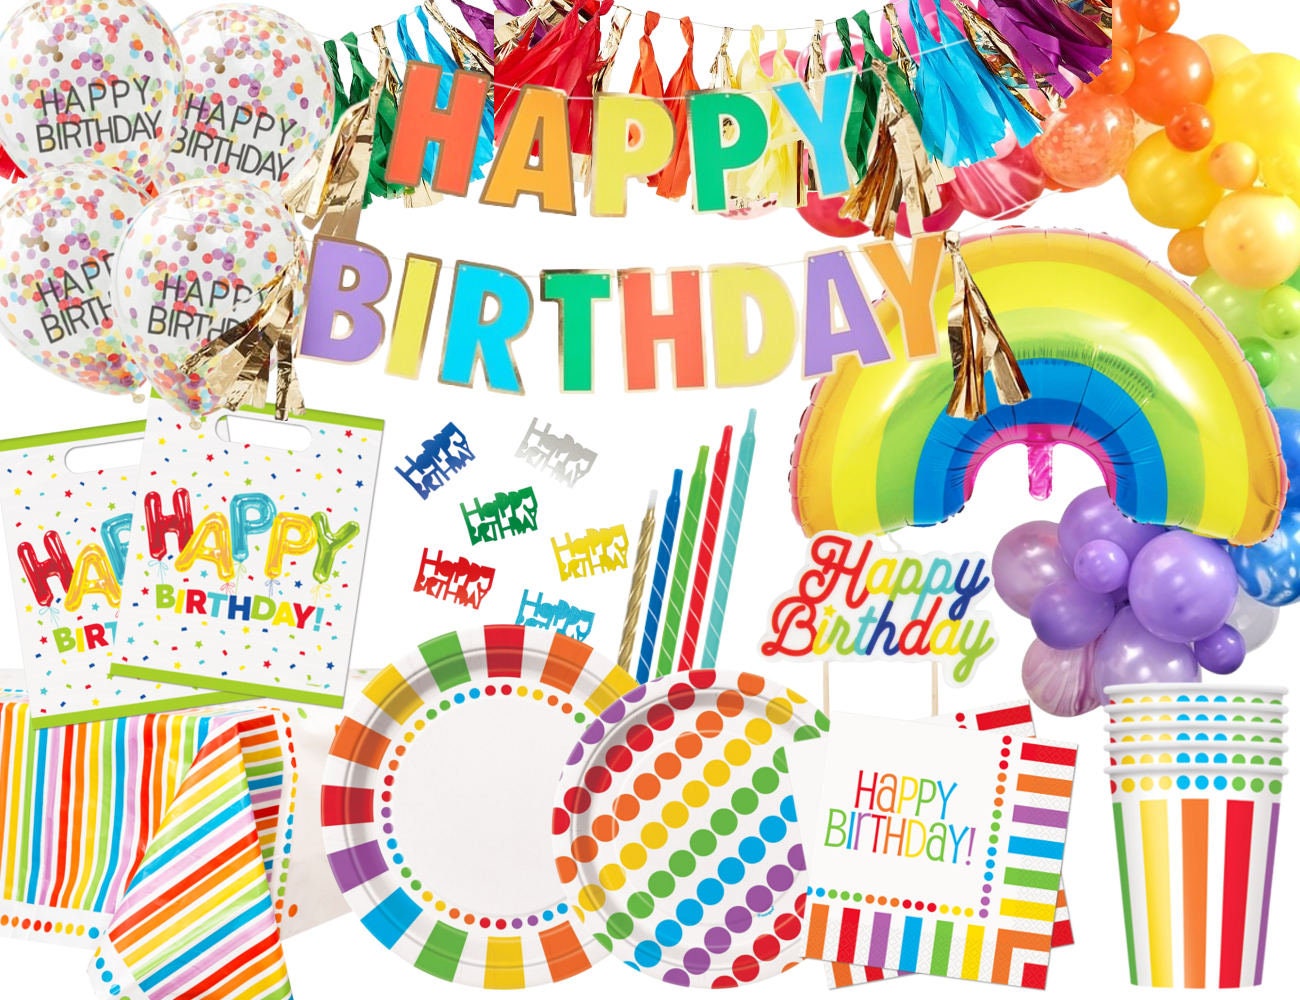 275PC Colorful Birthday Party Decorations for Boy, Girl, Adults Rainbow  Party Supplies With Happy Birthday Banner, Balloon Garland Arch Kit 